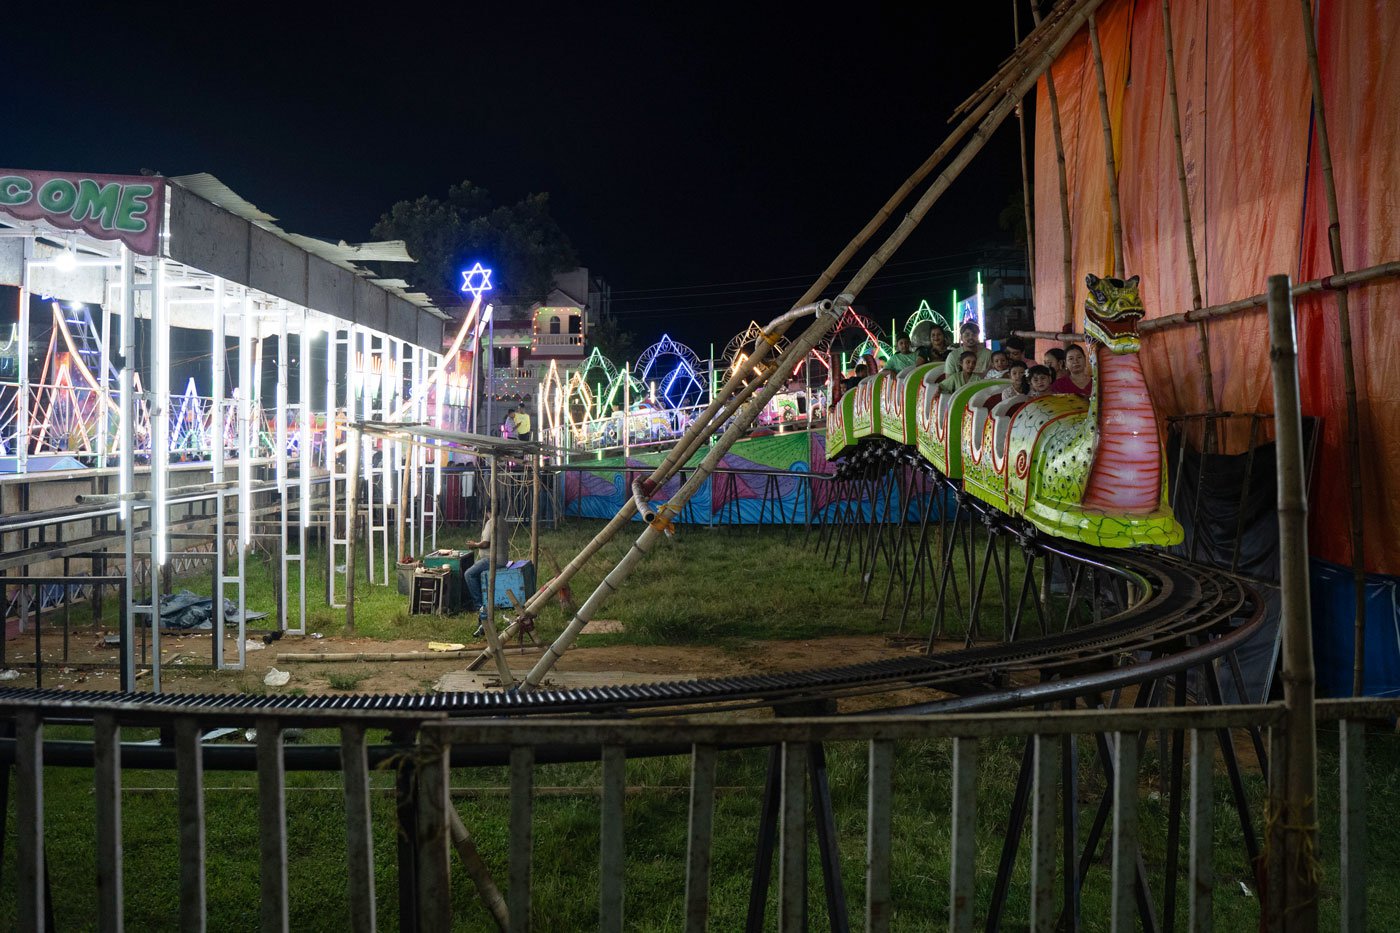 The maut-ka-kuan is one of many attractions at this Durga Puja mela in October 2023 in Agartala, Tripura. Other attractions include a ferris wheel, merry-go-round and toy-trains